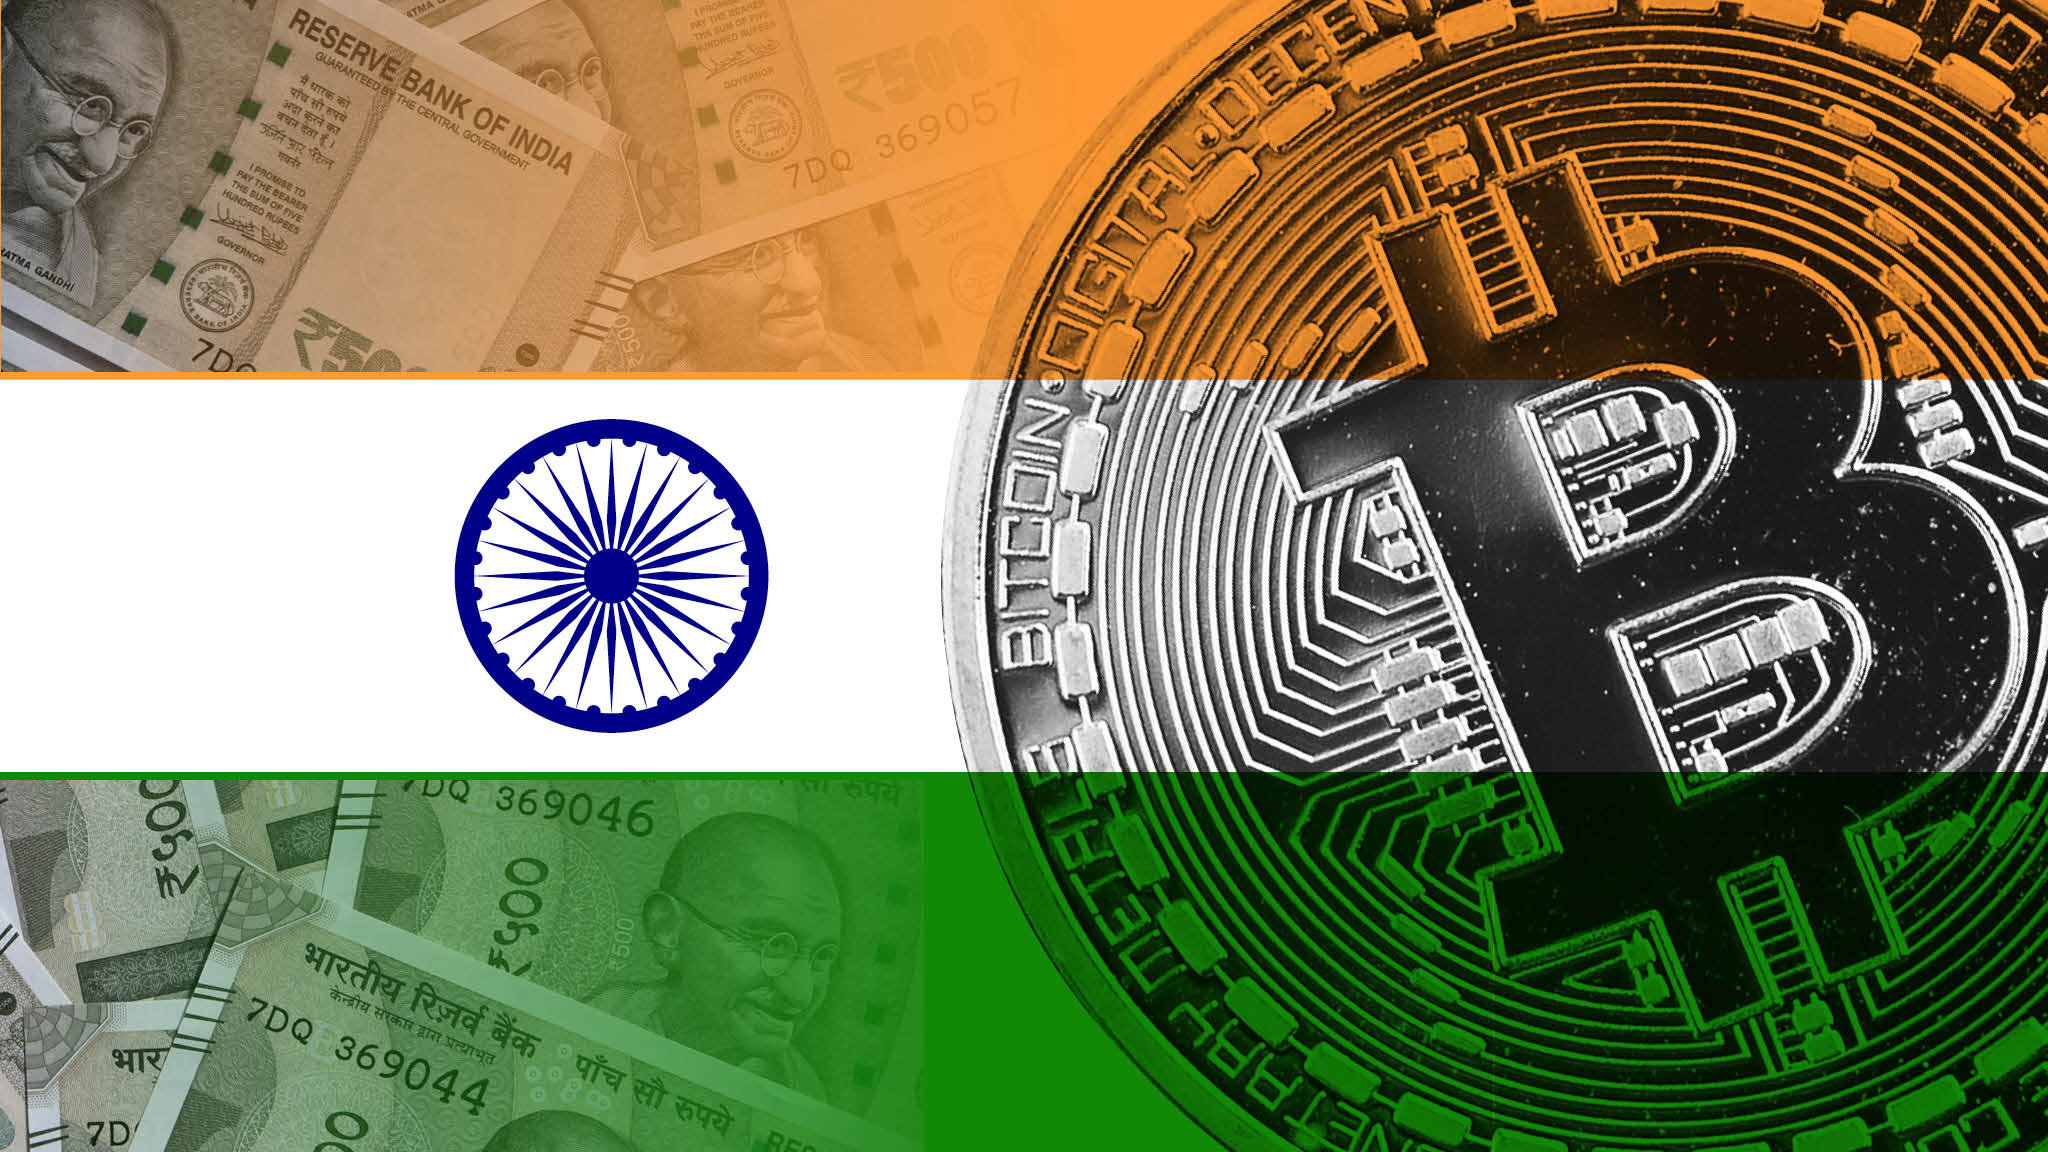 Just do your own research, figure out the decentralized nature of bitcoin and other cryptocurrencies makes it simpler to make transactions. India S Cryptocurrency Traders Scramble After Rbi Crackdown Financial Times